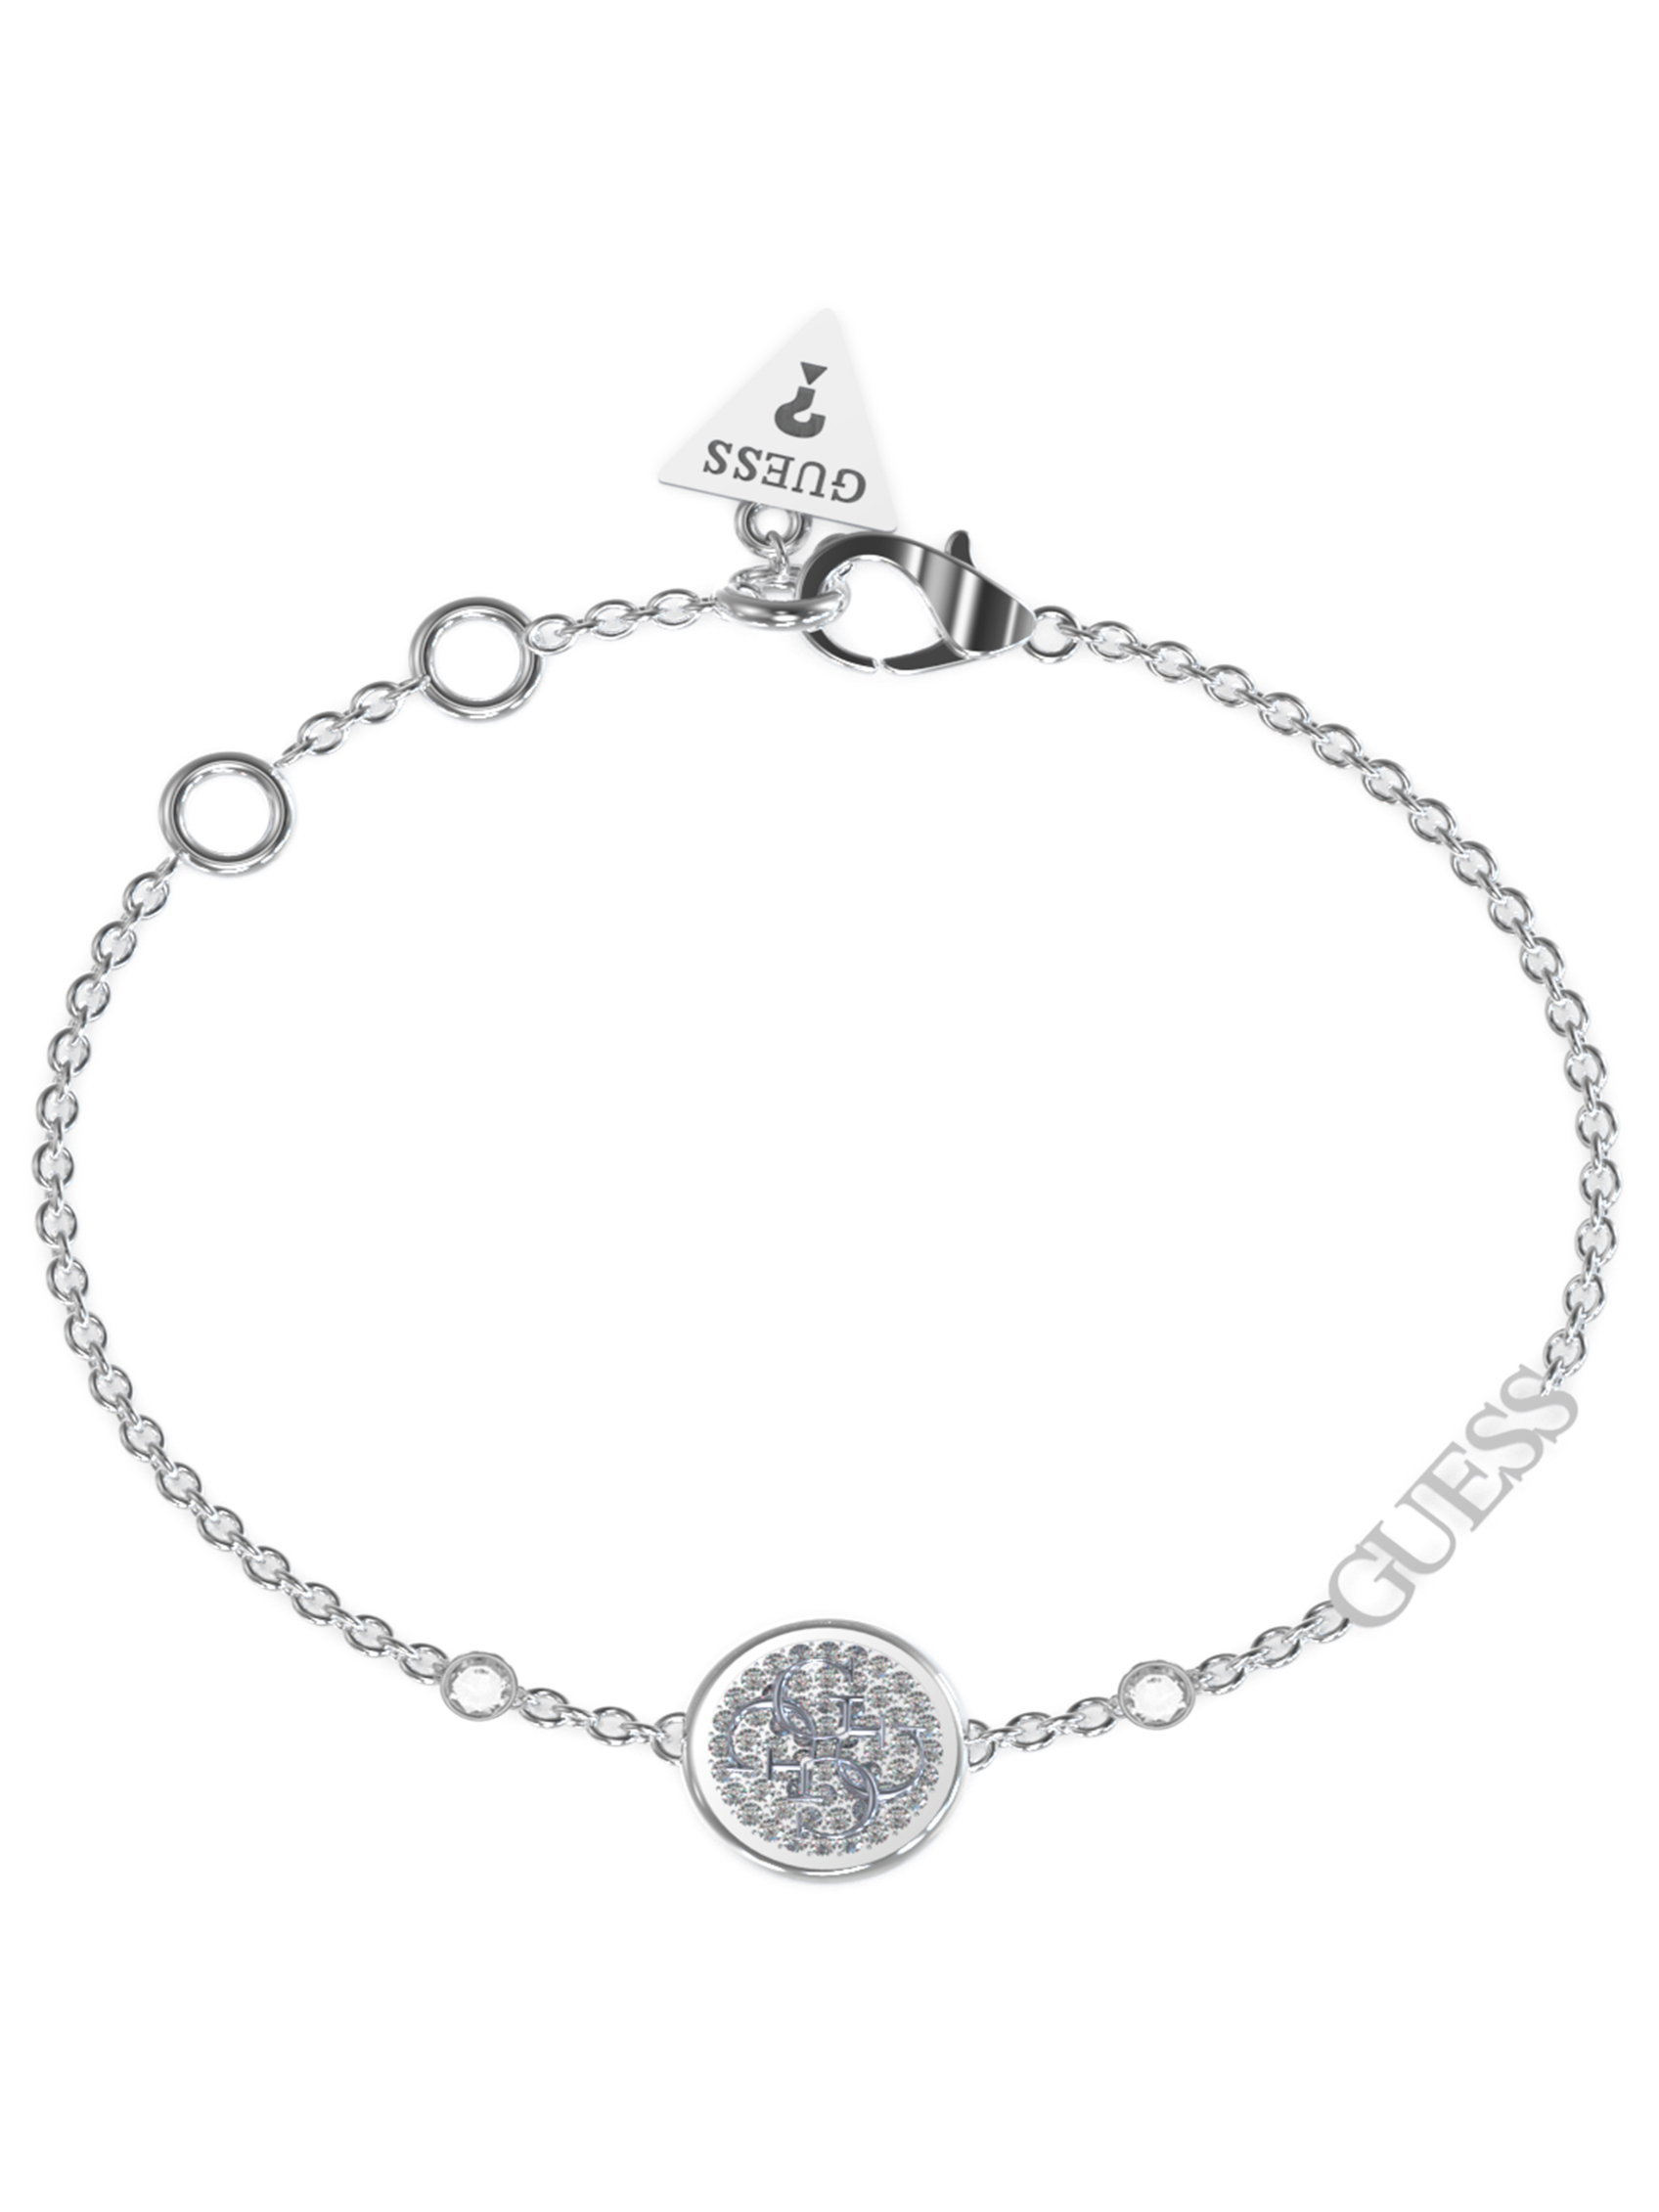 DREAMING GUESS 12MM PAVE & 4G COIN SILVER | Guess Philippines